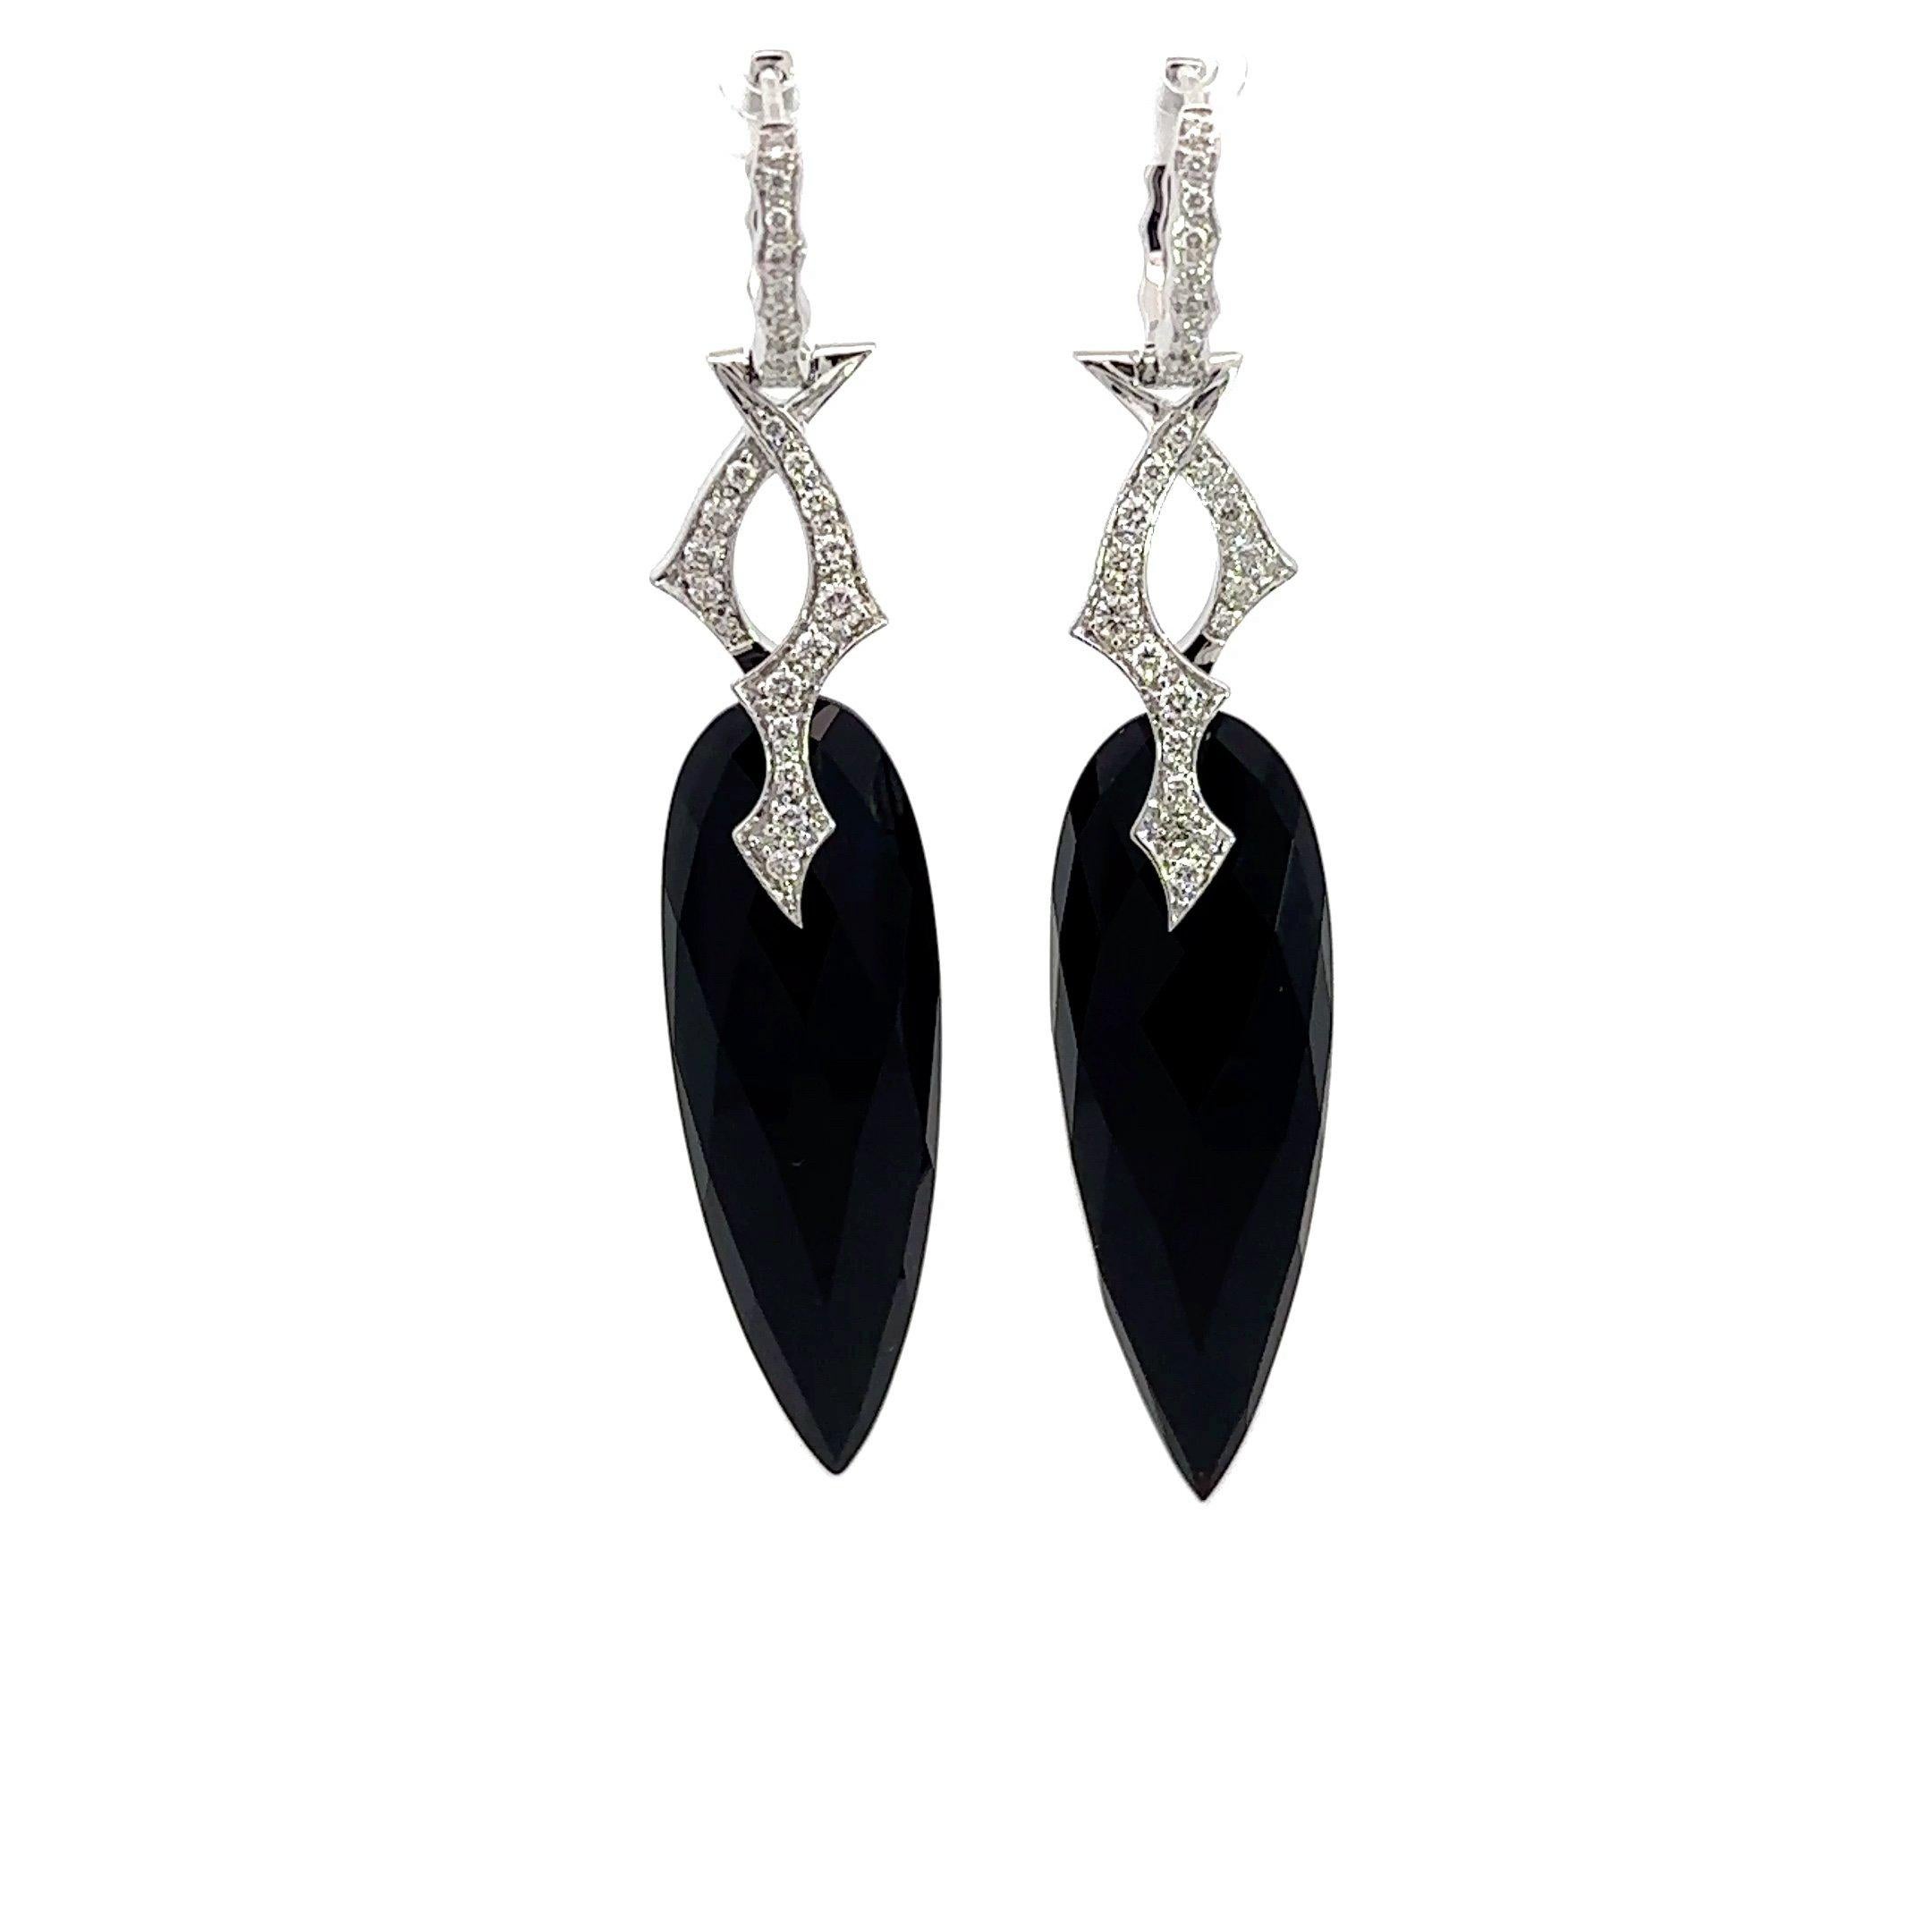 These Stephen Webster earrings feature vine motif diamond tops in 18KT white gold with approximately .78CT round diamonds suspending a faceted pear-shaped onyx. Each earring is stamped 18K and SW for Stephen Webster, with Stephen Webster maker's